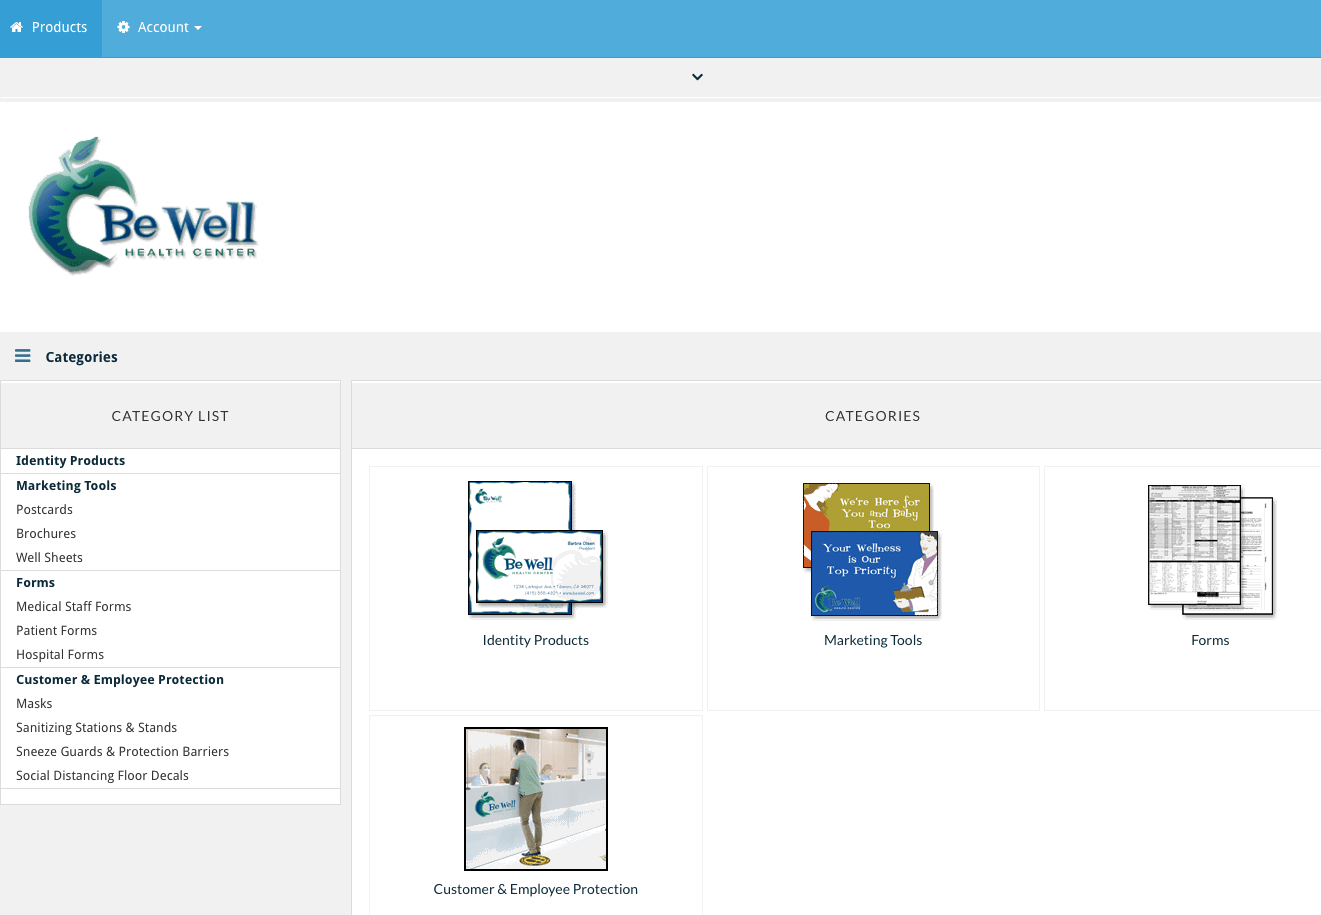 Health products website portal